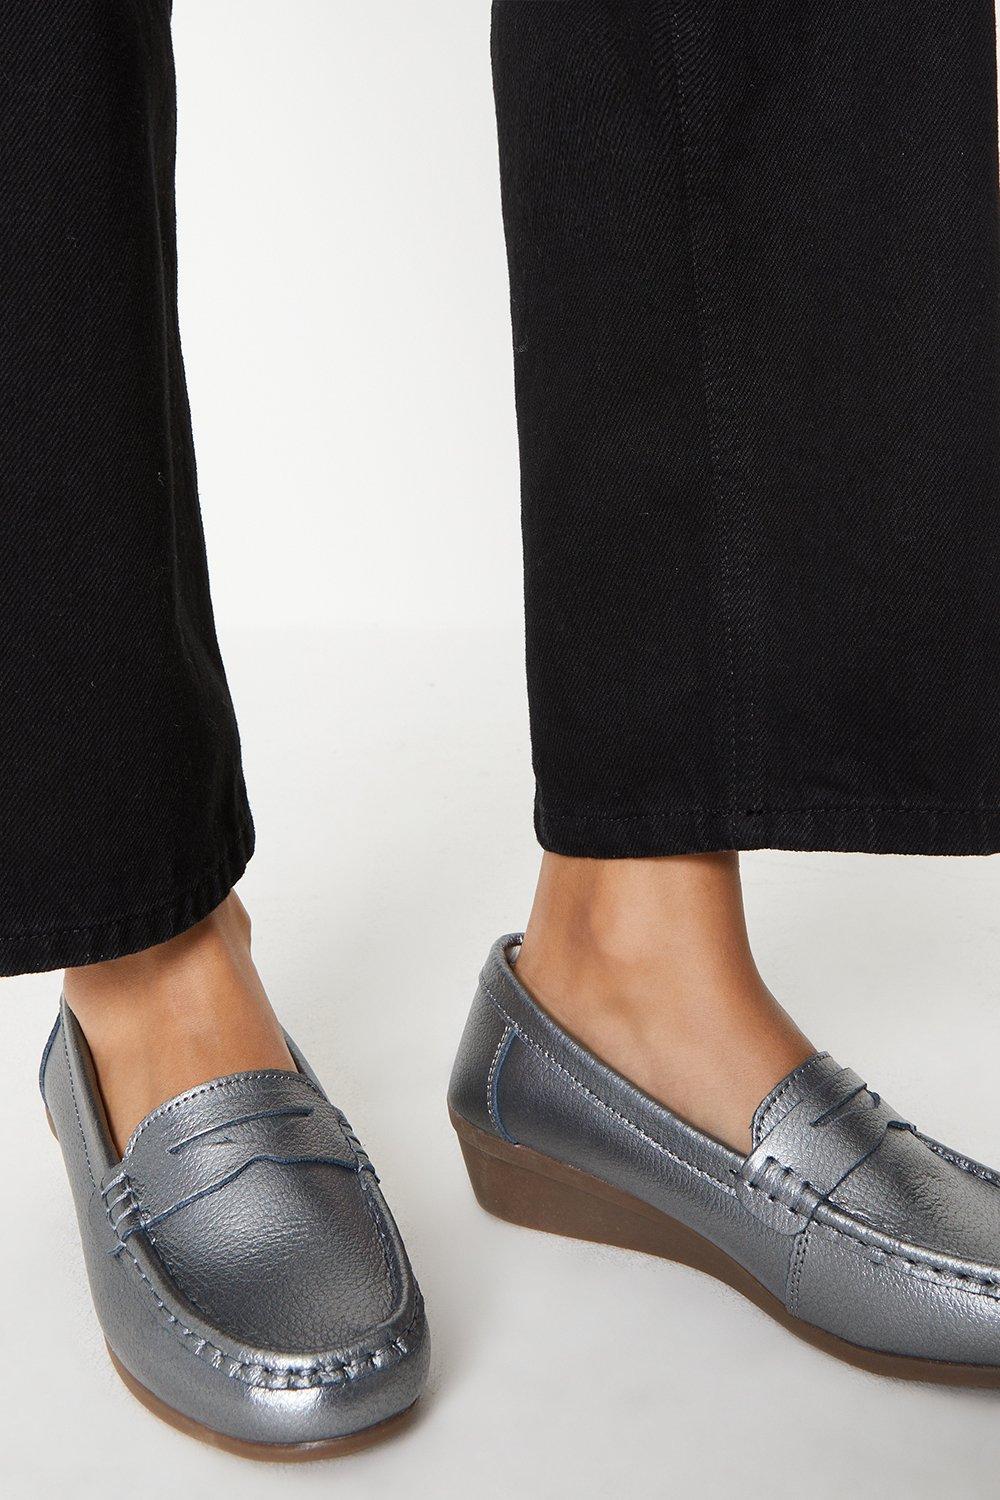 Women’s Good For The Sole: Niamh Wide Fit Leather Comfort Loafers - pewter - 7